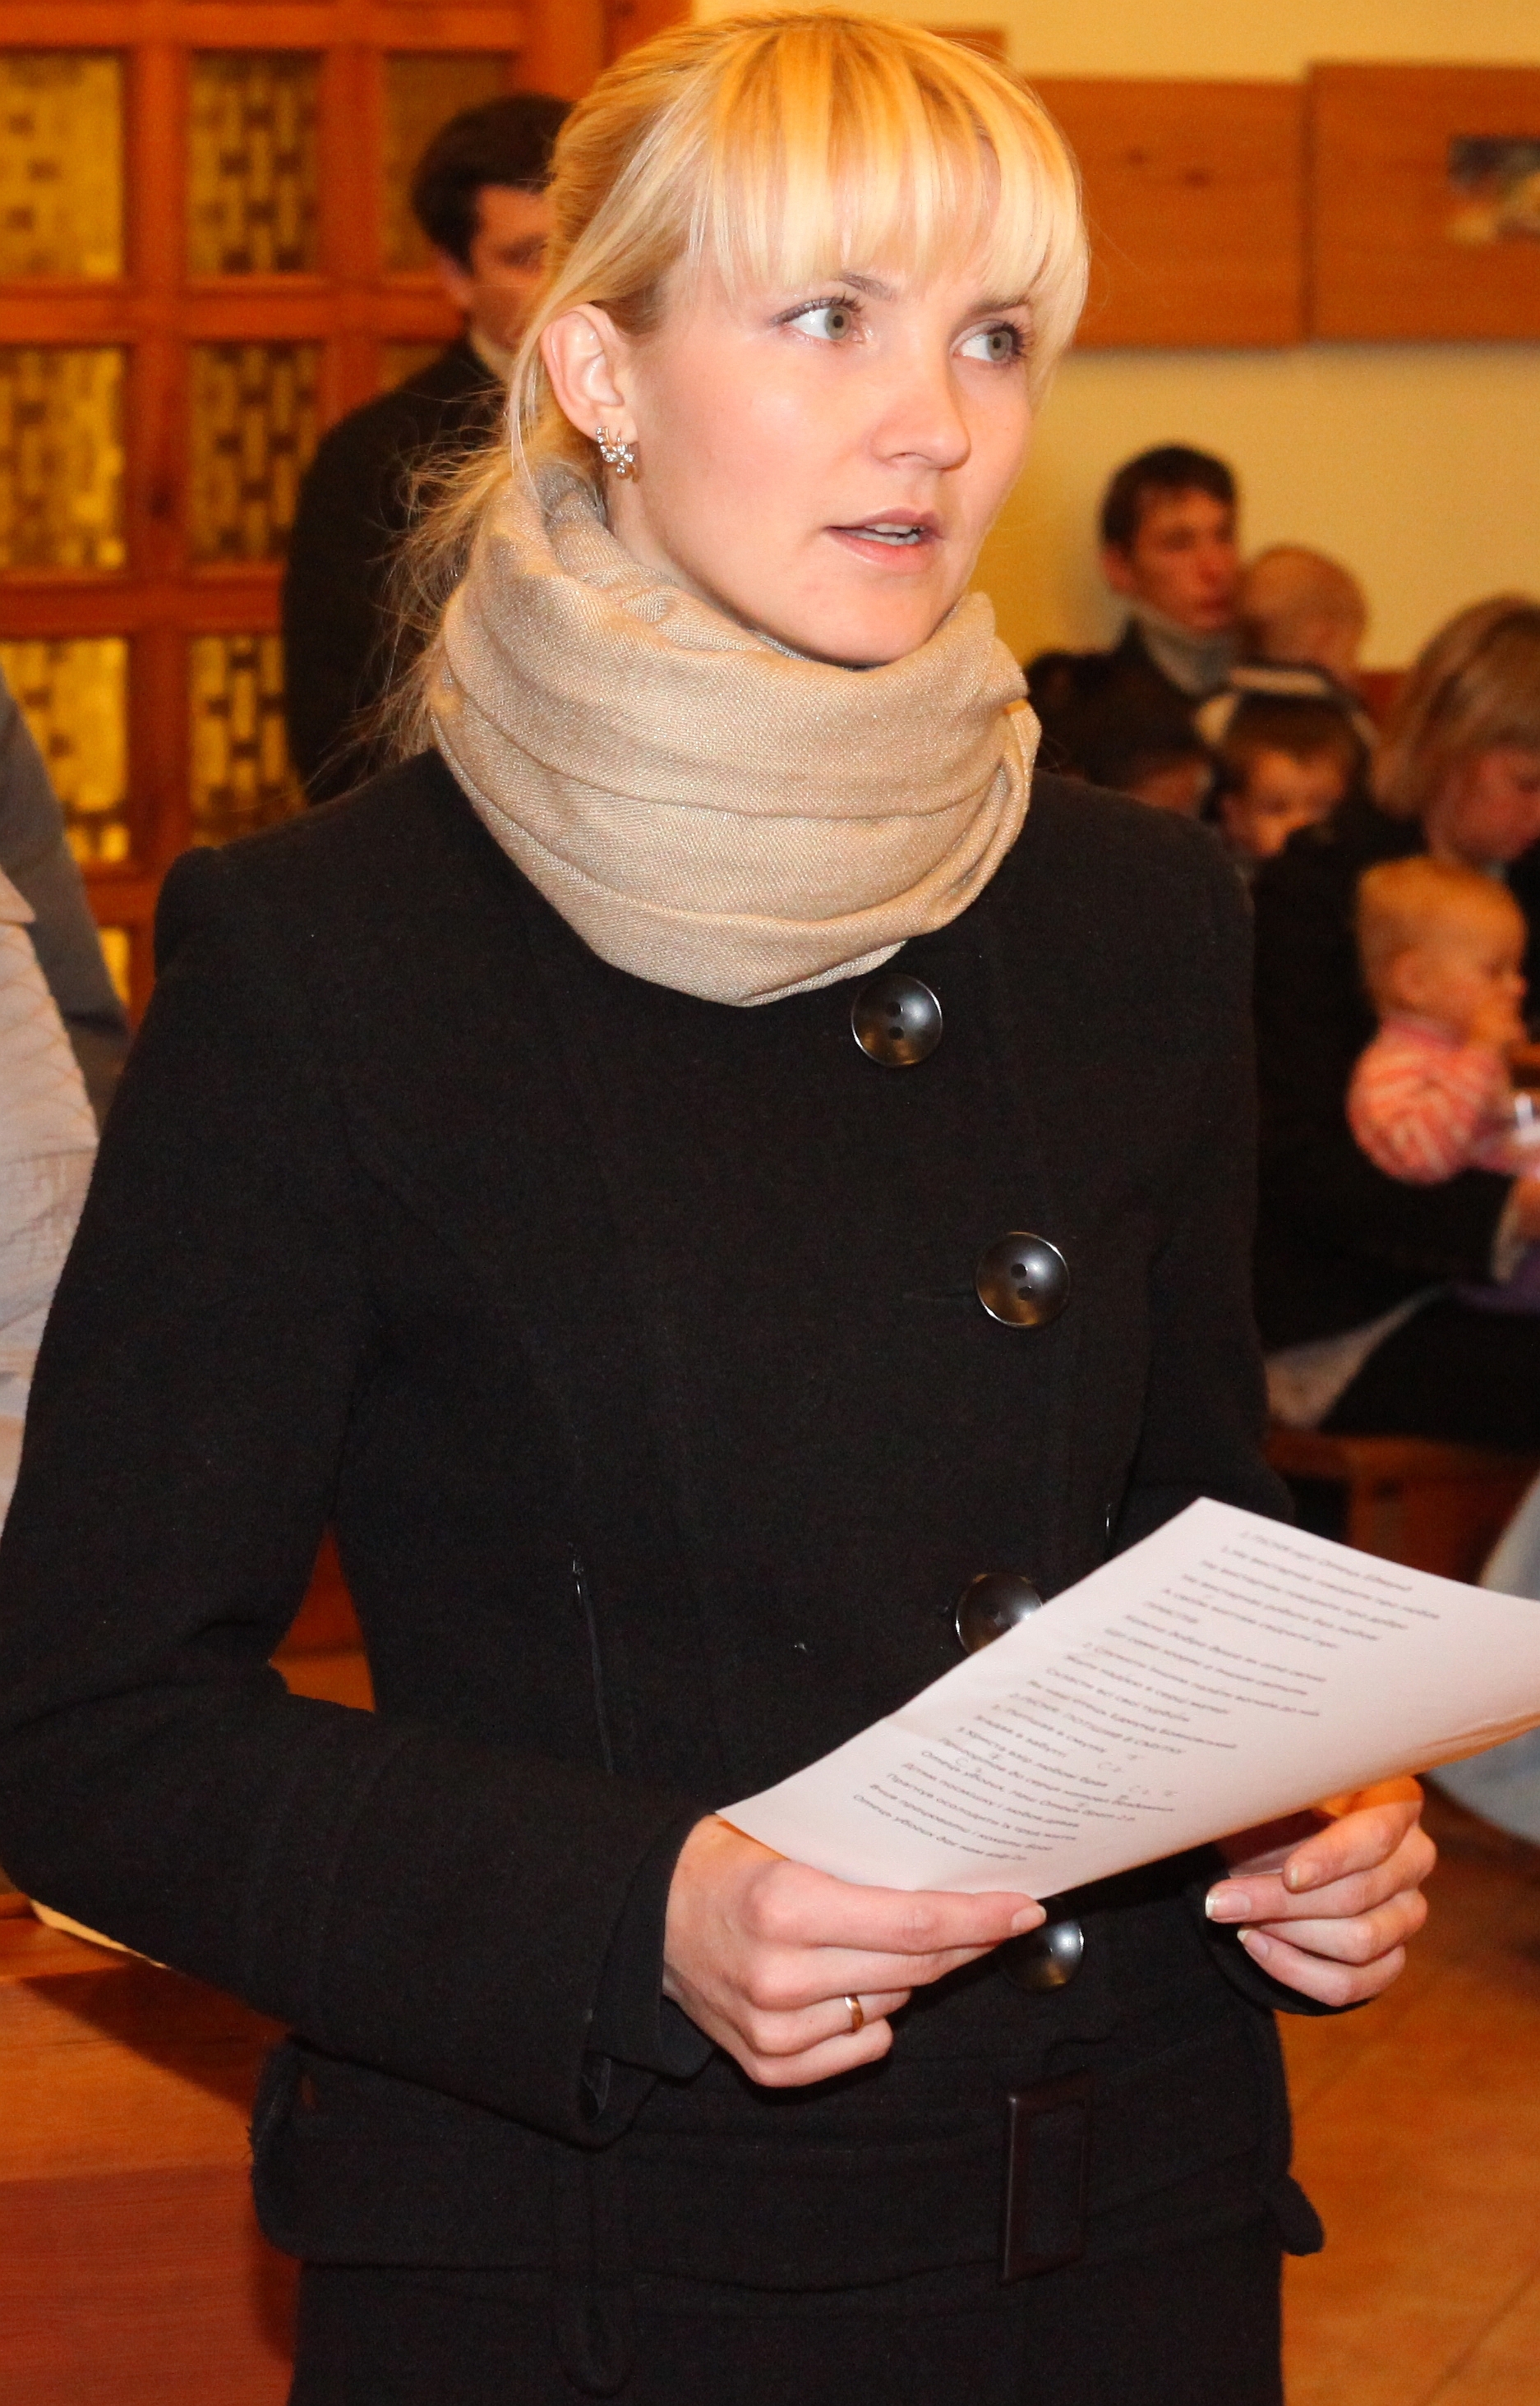 an amazingly tender and charming beautiful young blond Catholic woman in a Church, photo 4